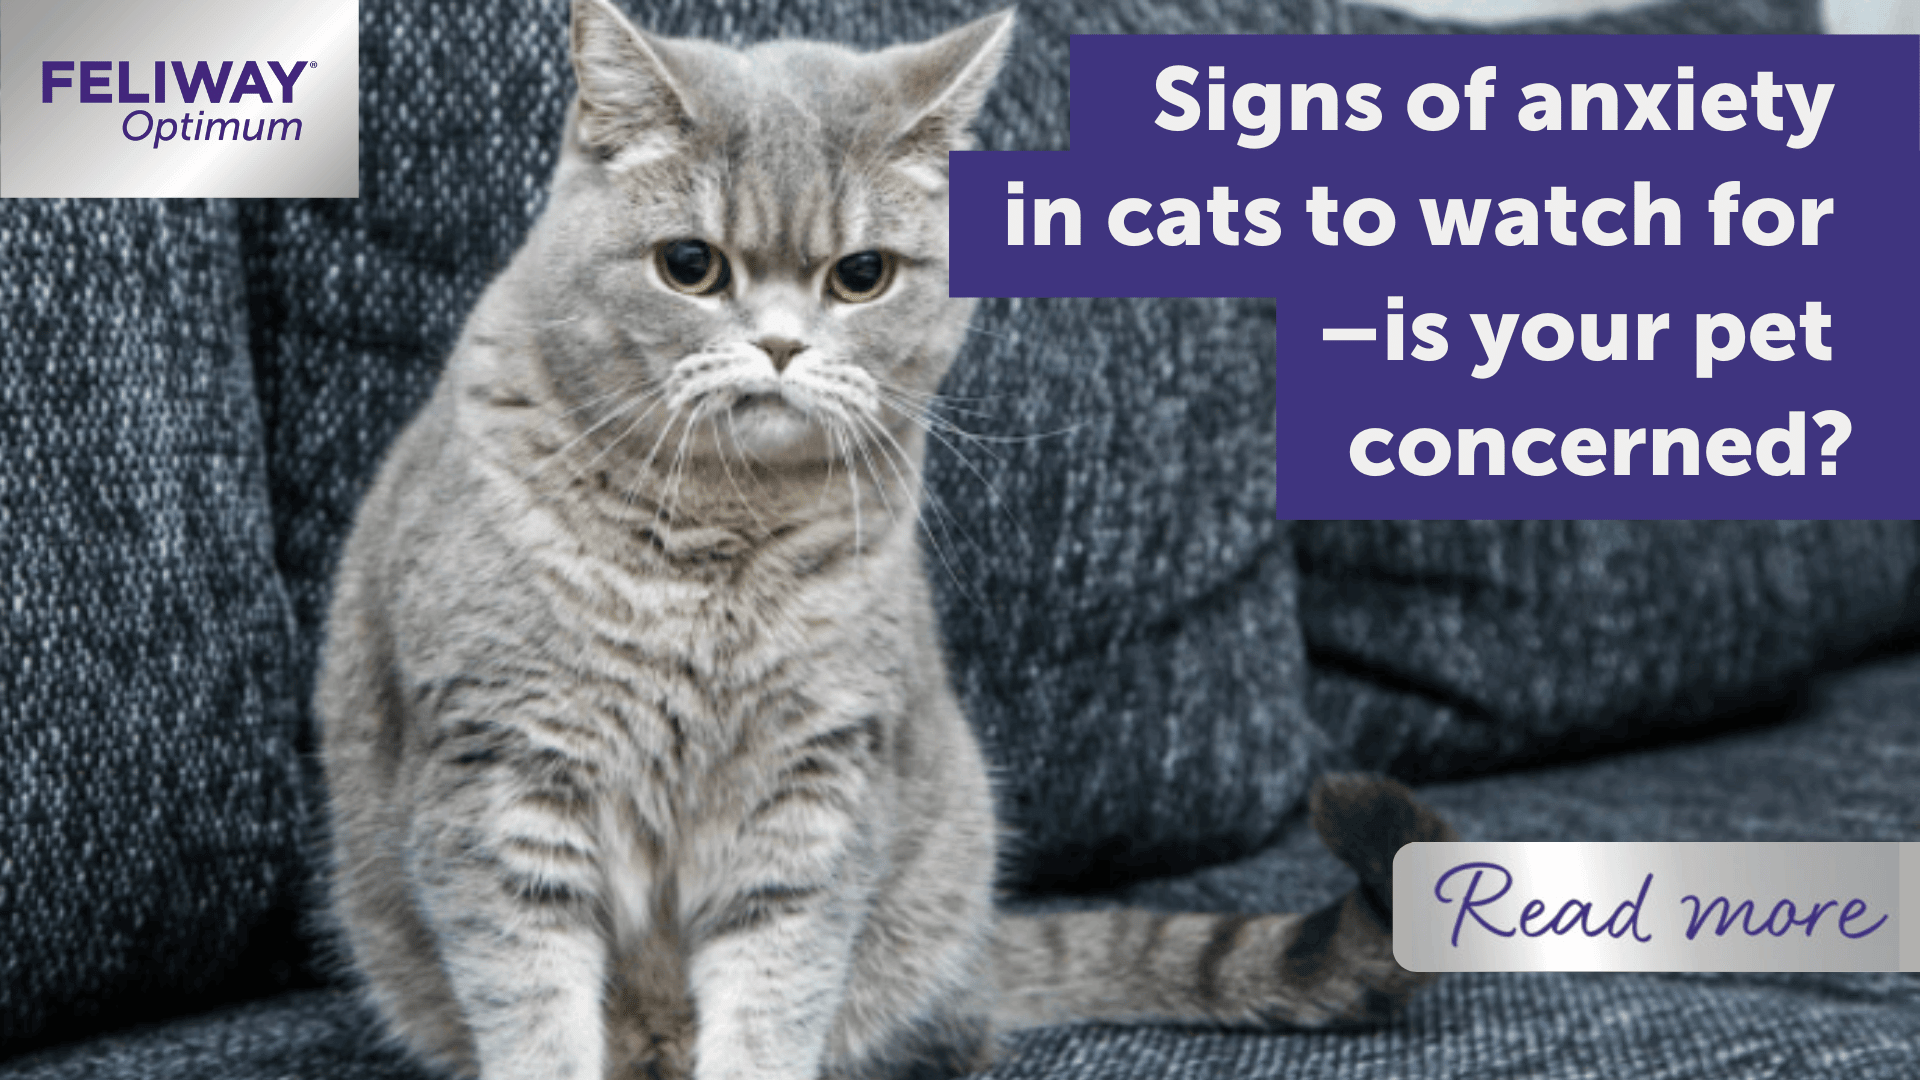 Signs of anxiety in cats to watch for – is your pet concerned?